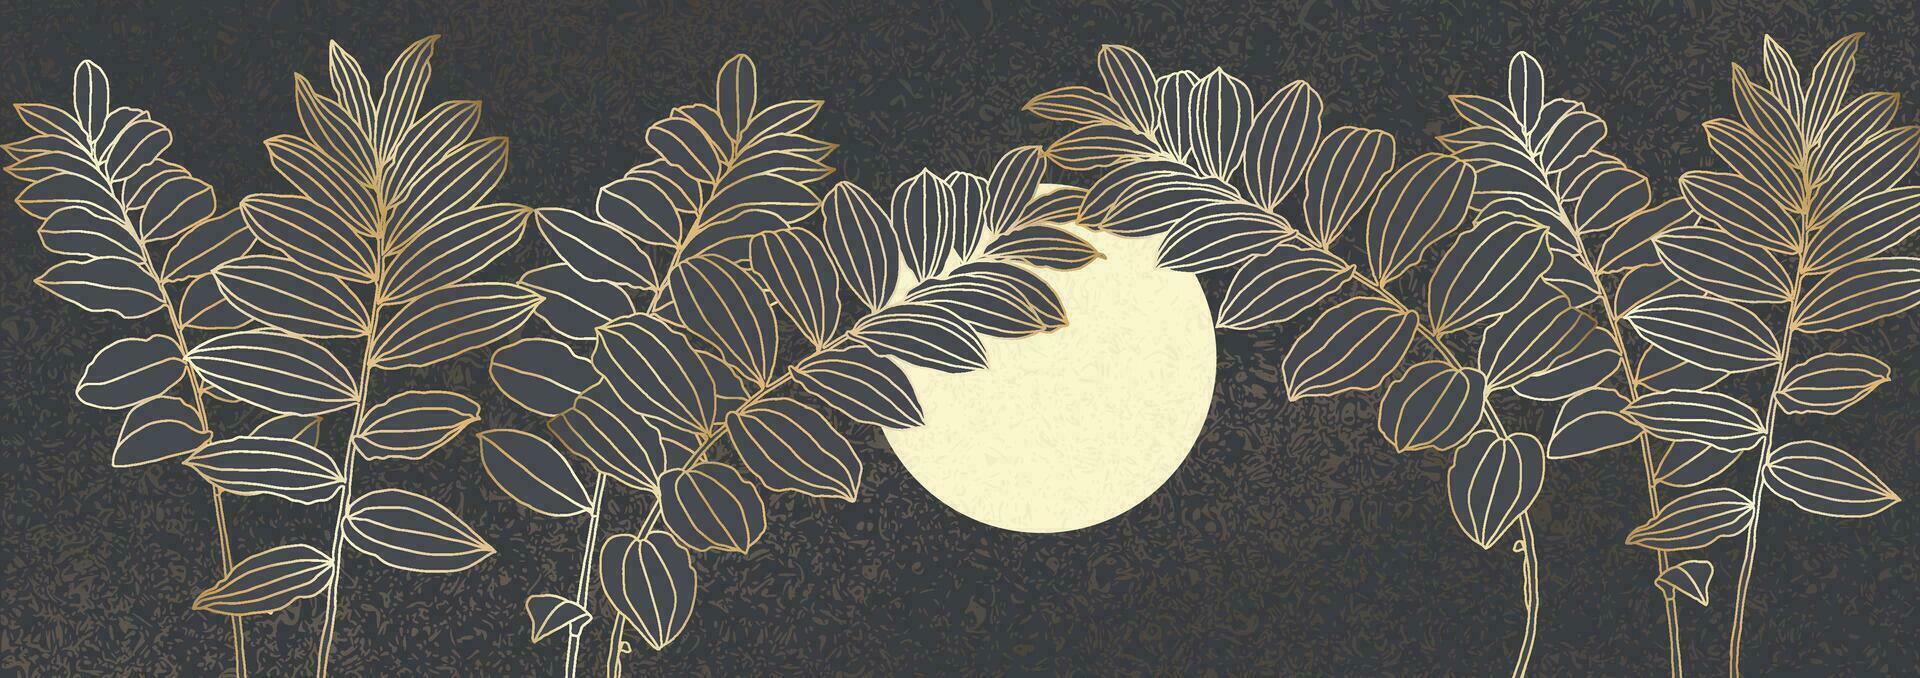 Digital vector illustration - silhouettes leaves with golden outline and light yellow circle on dark grey. Luxurious art deco wallpaper design for print, poster, cover, banner, fabric, invitation.